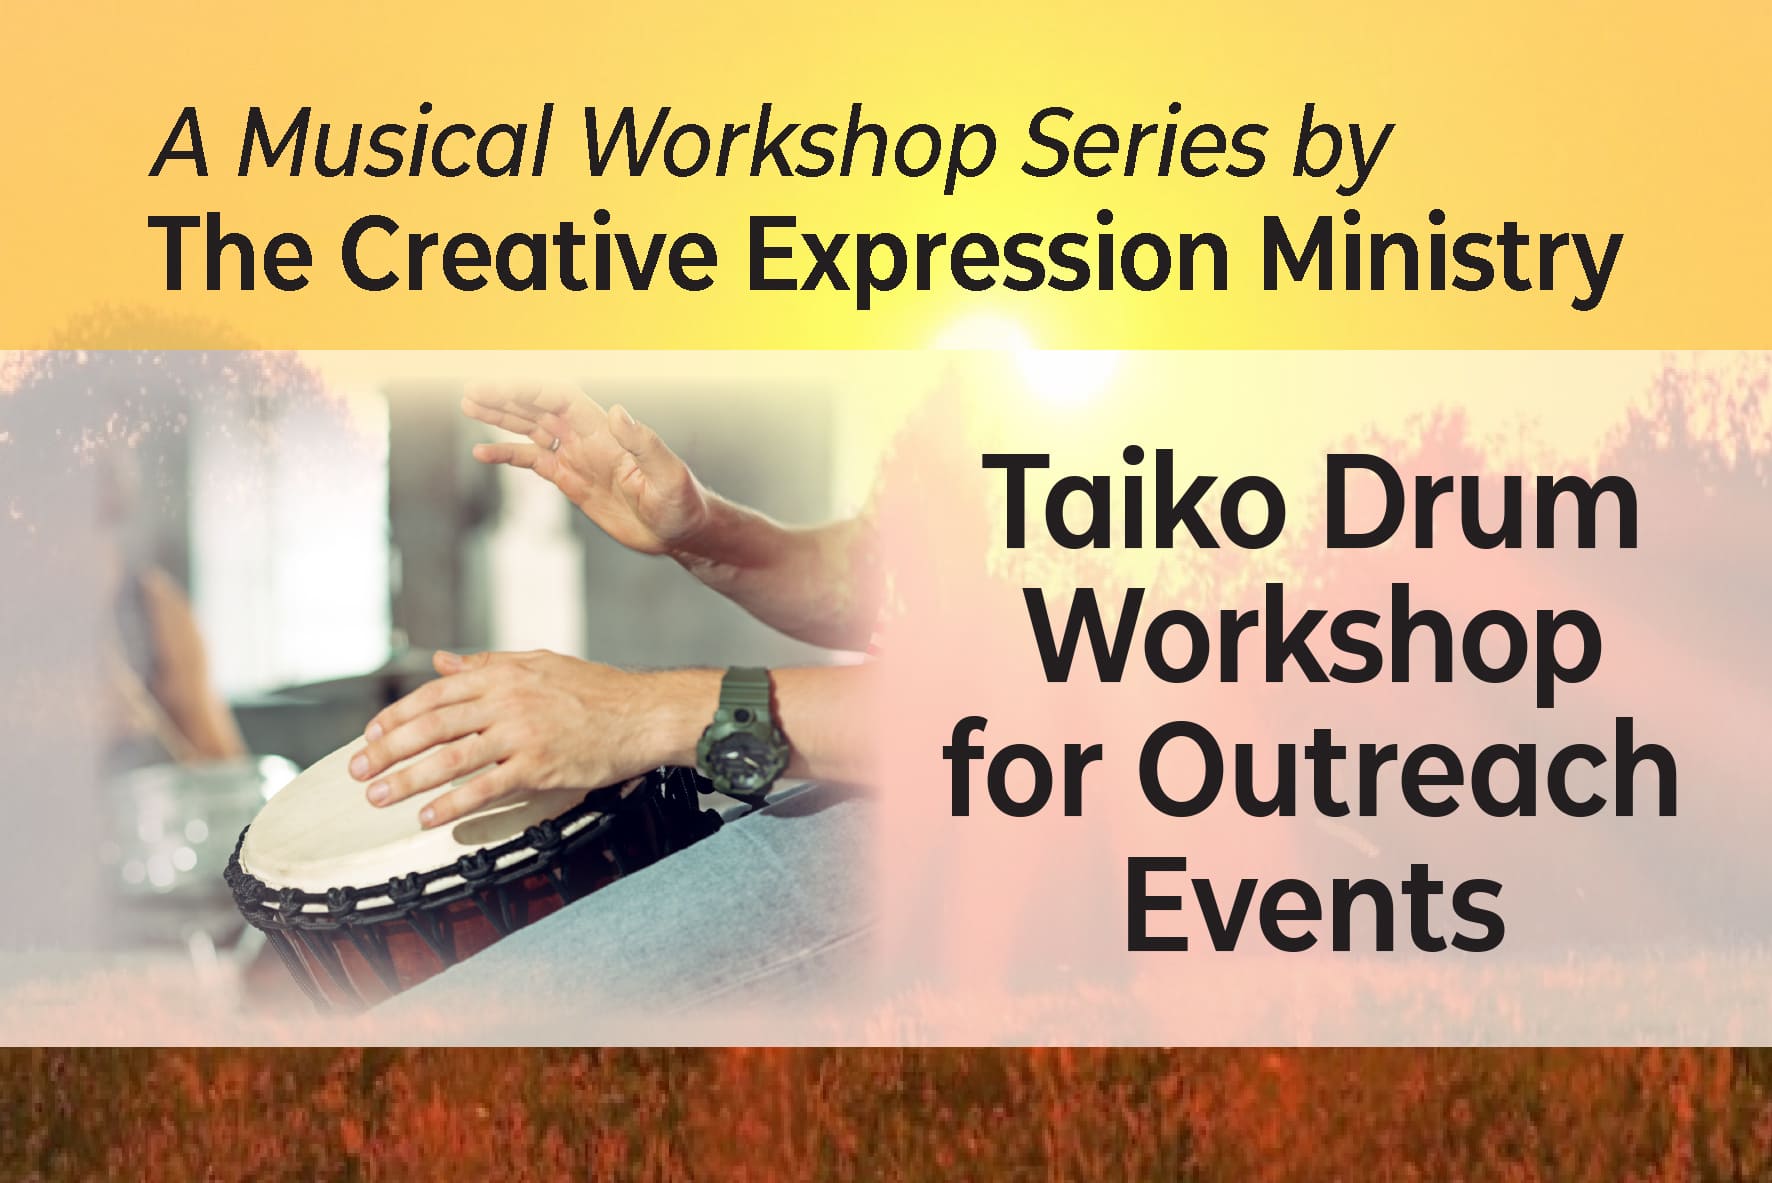 Taiko Drum Workshop for Outreach Events